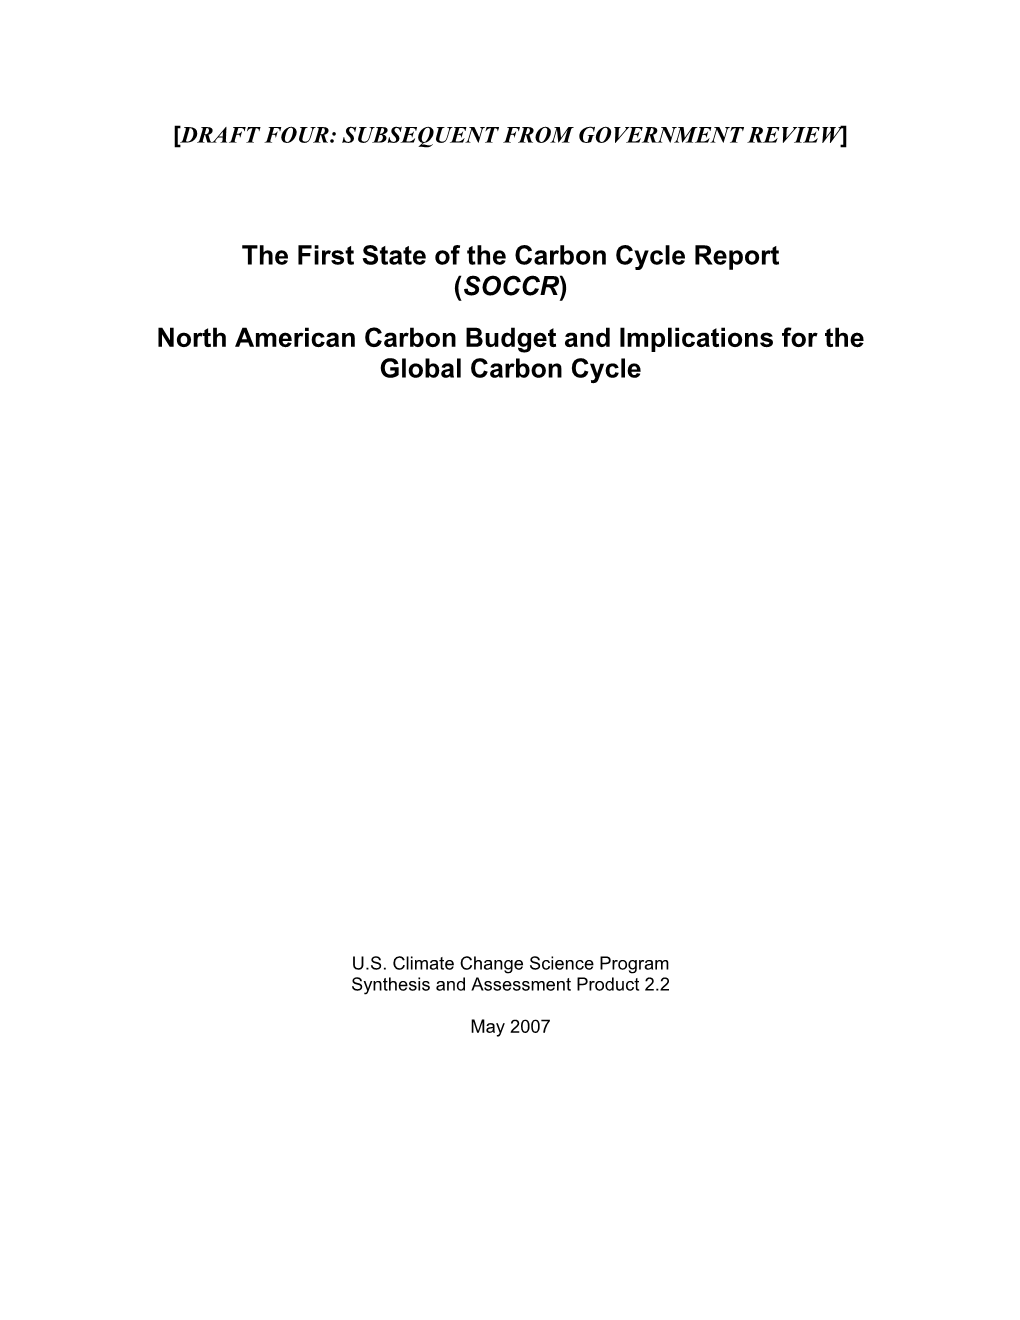 The First State of the Carbon Cycle Report (SOCCR)